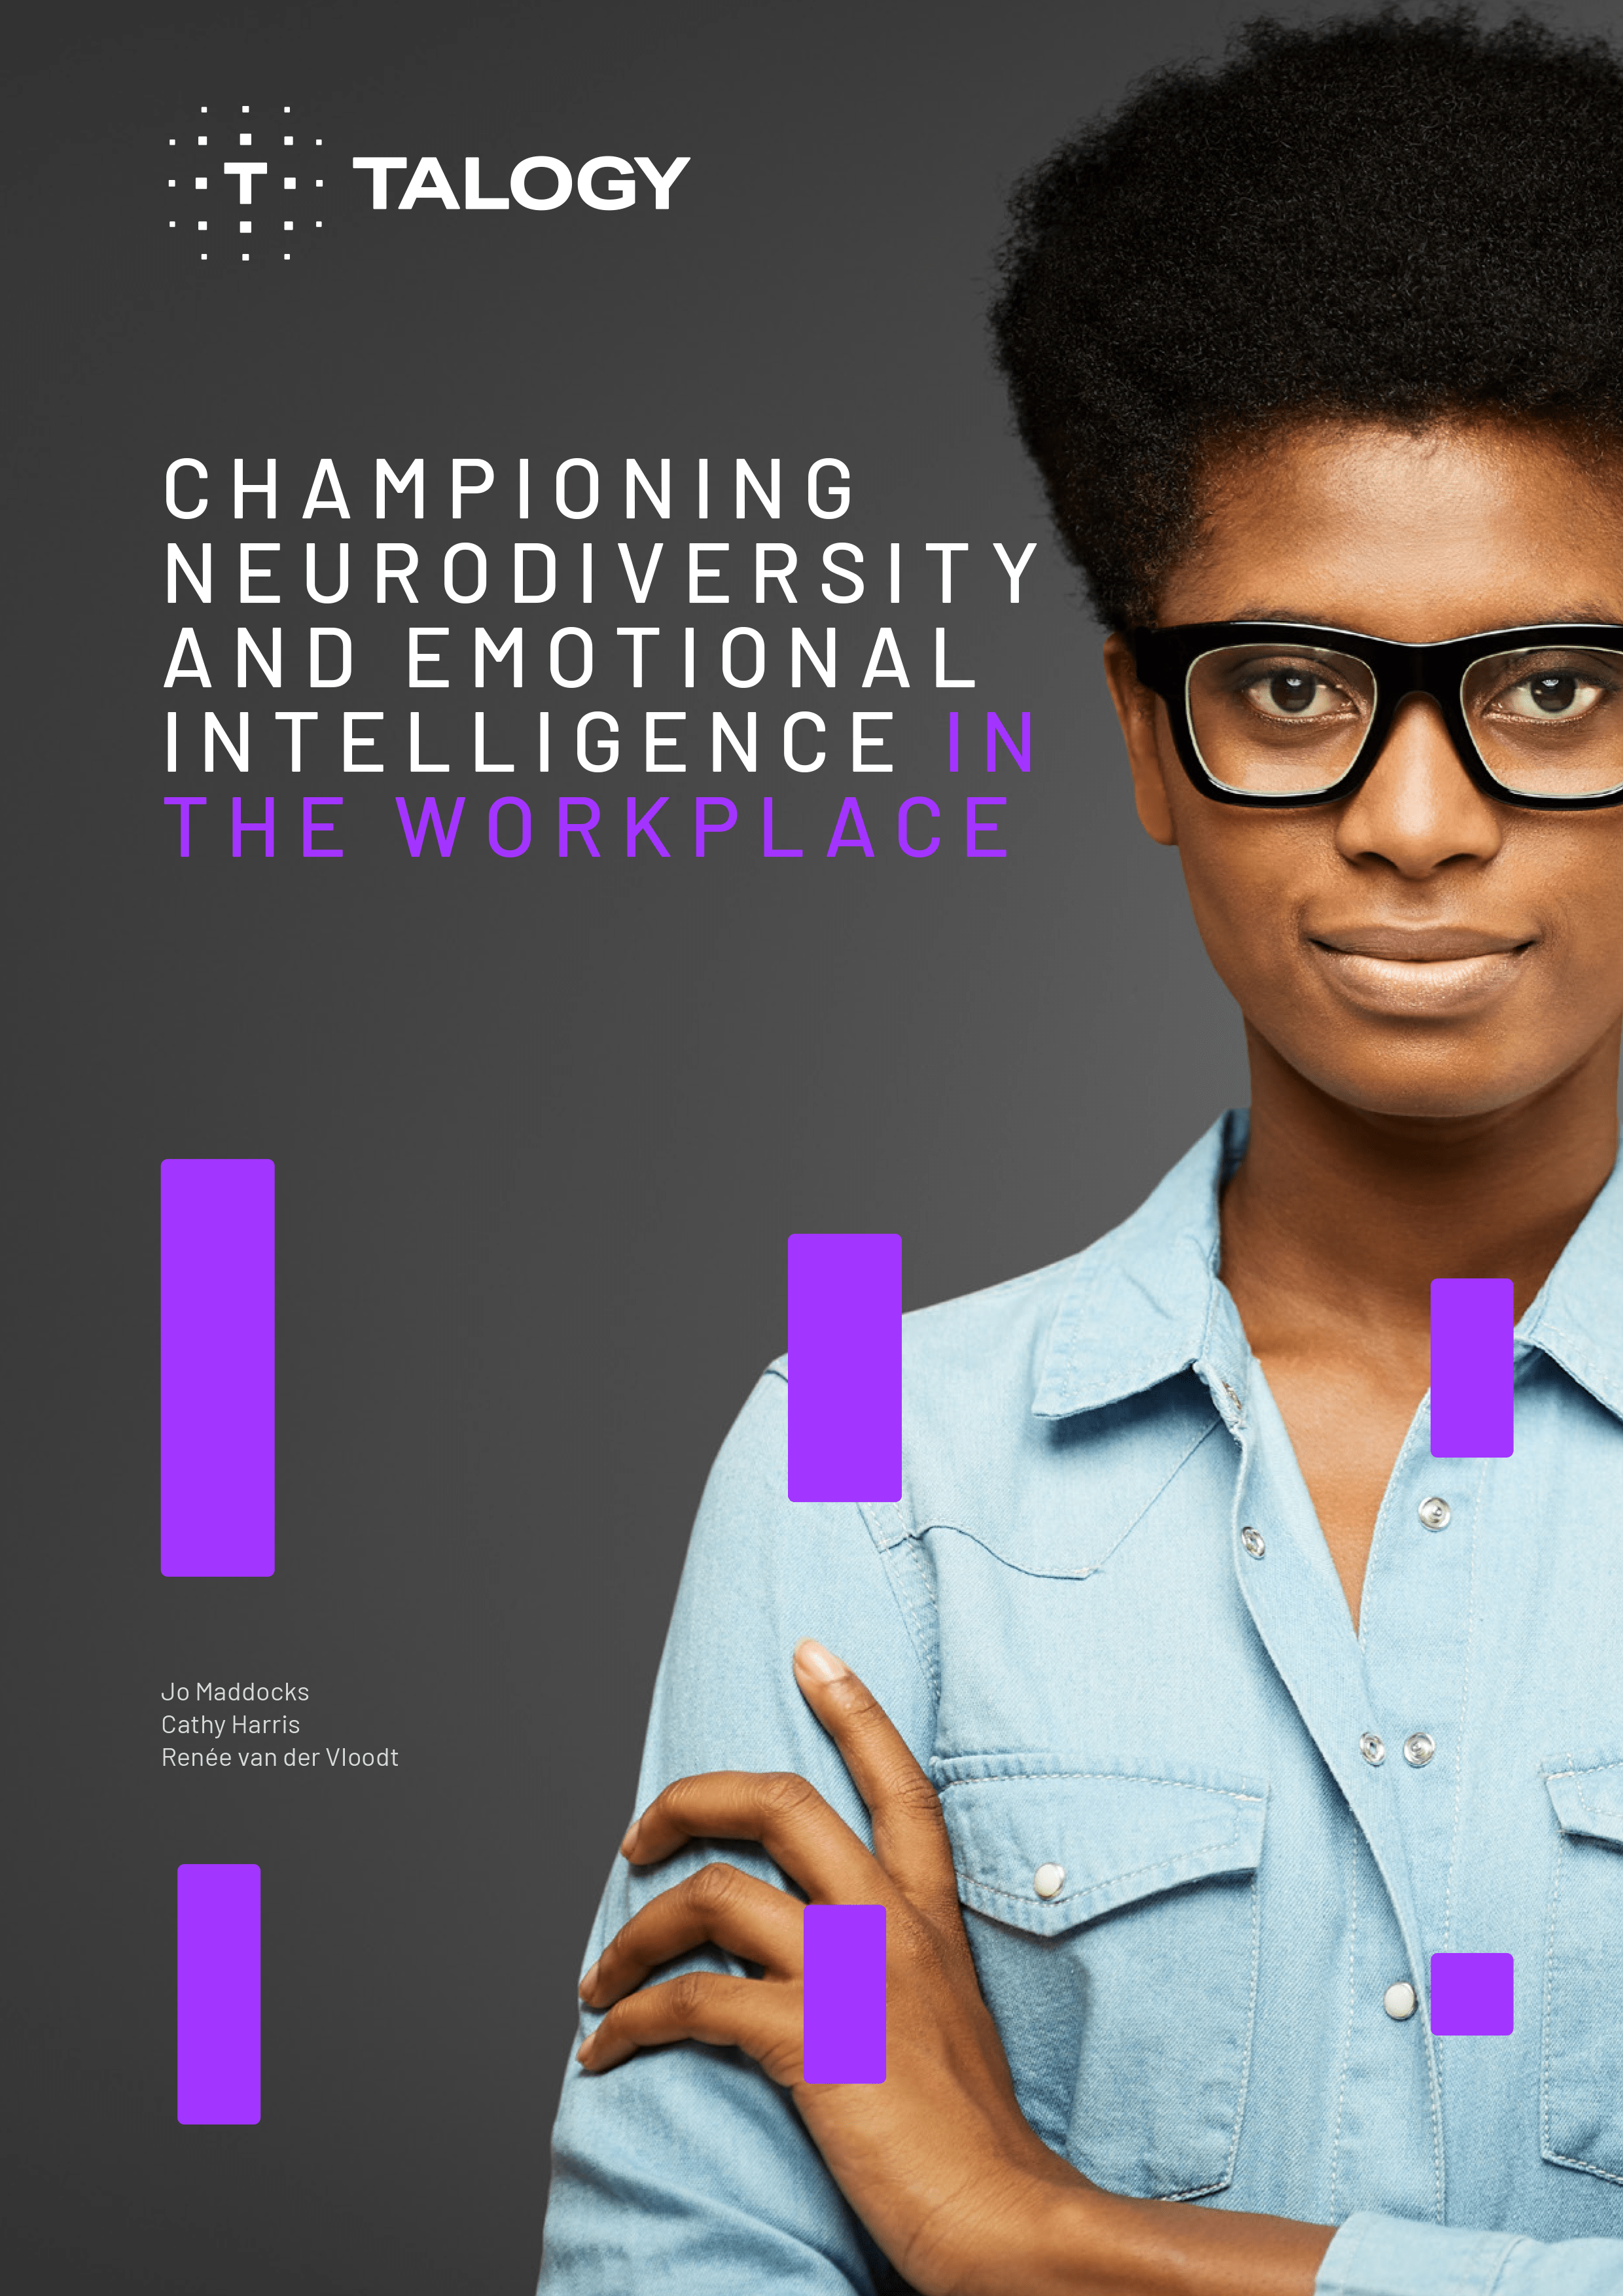 Championing neurodiversity and EI in the workplace whitepaper cover